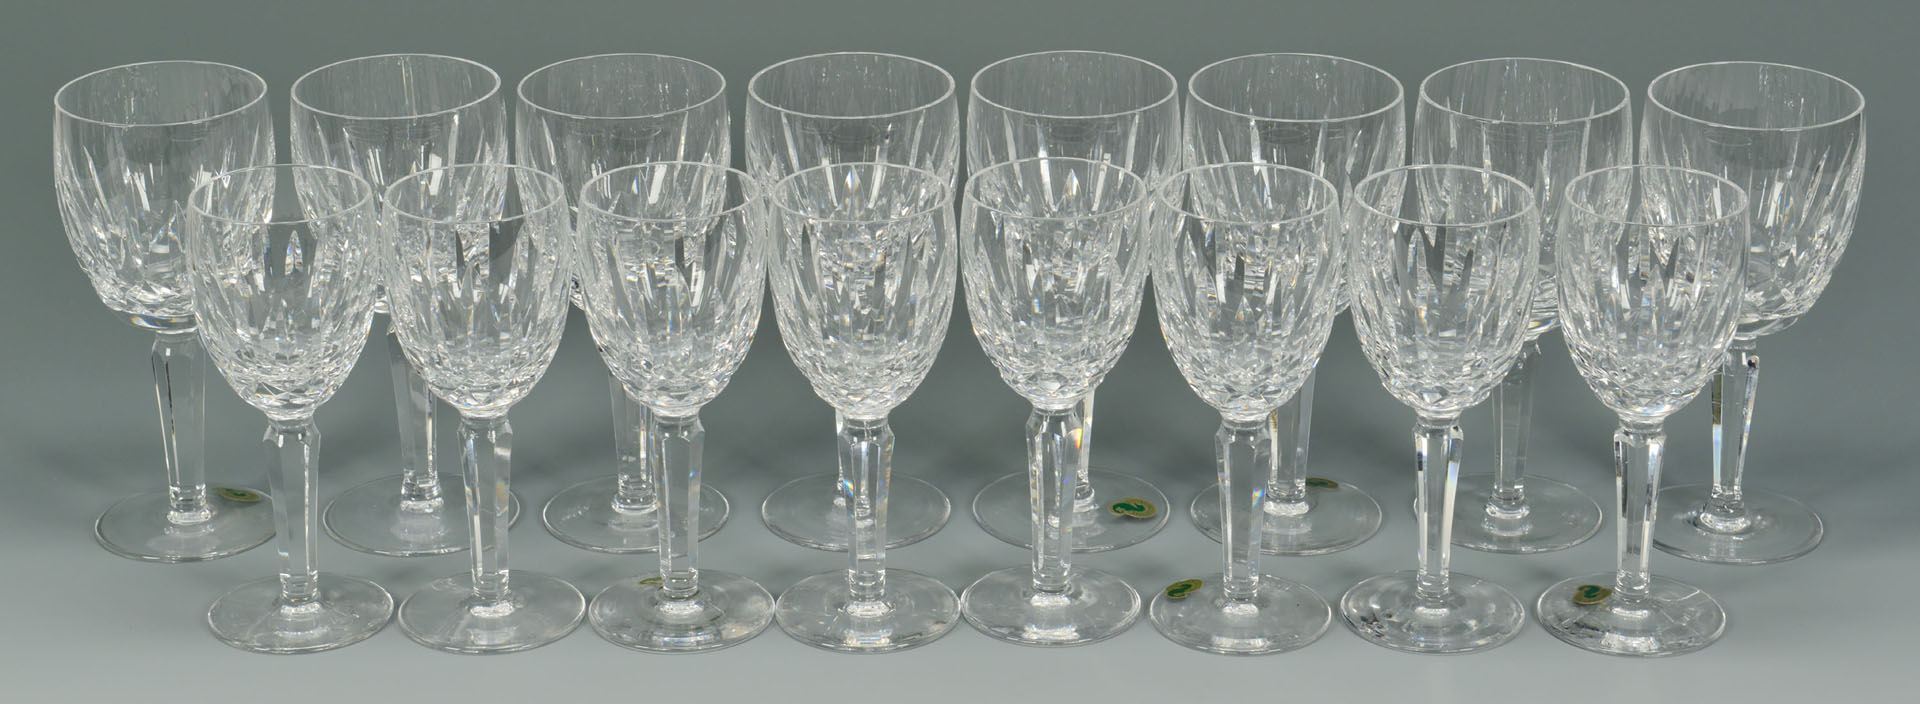 Lot 626: 16 Waterford Crystal Glasses, Kildare Pattern